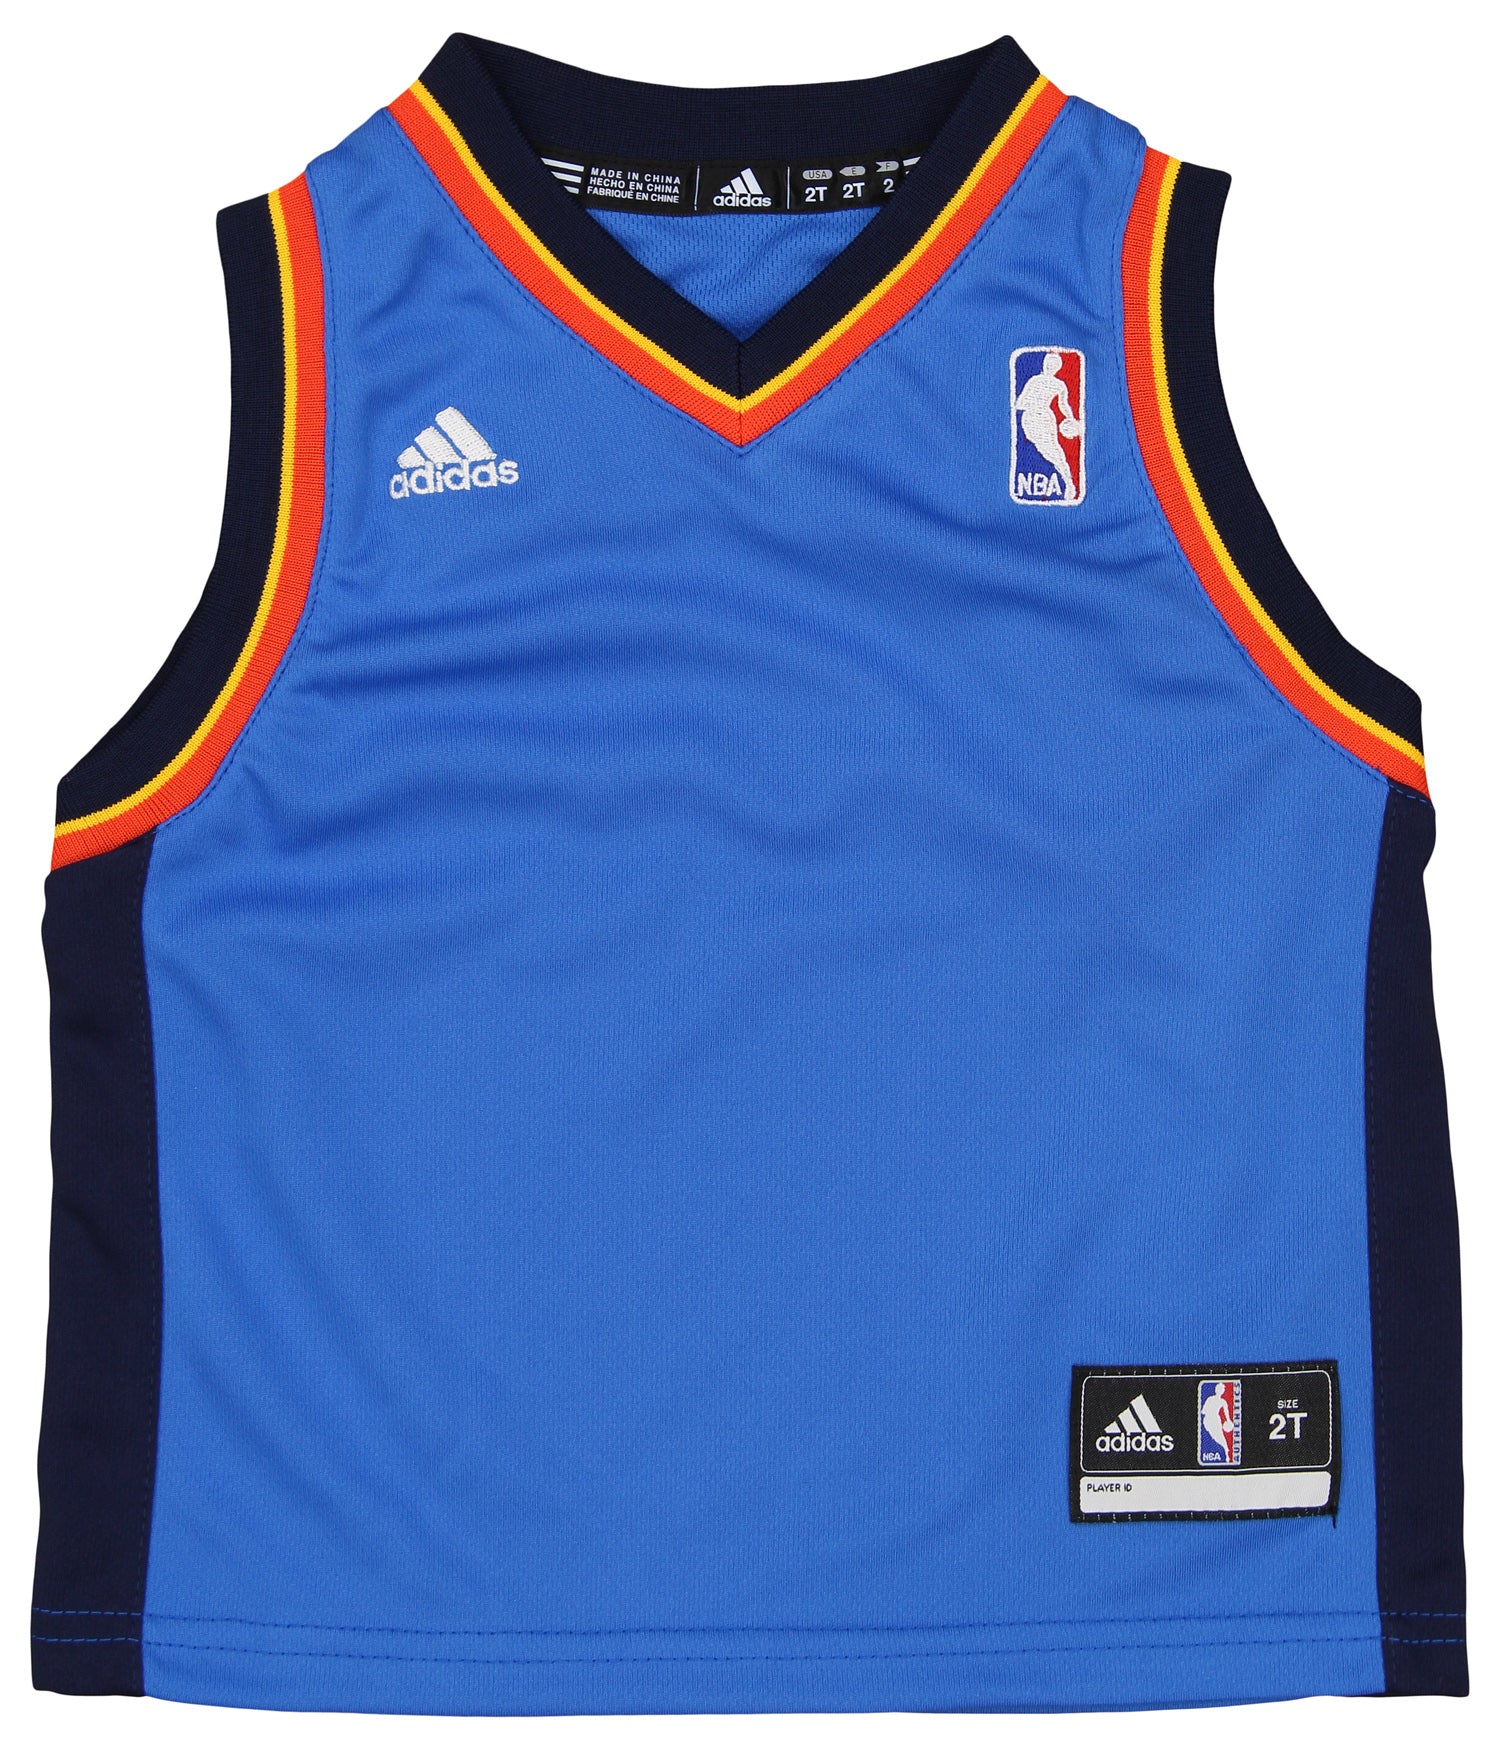 Outerstuff NBA Youth Boys Replica Road Jersey